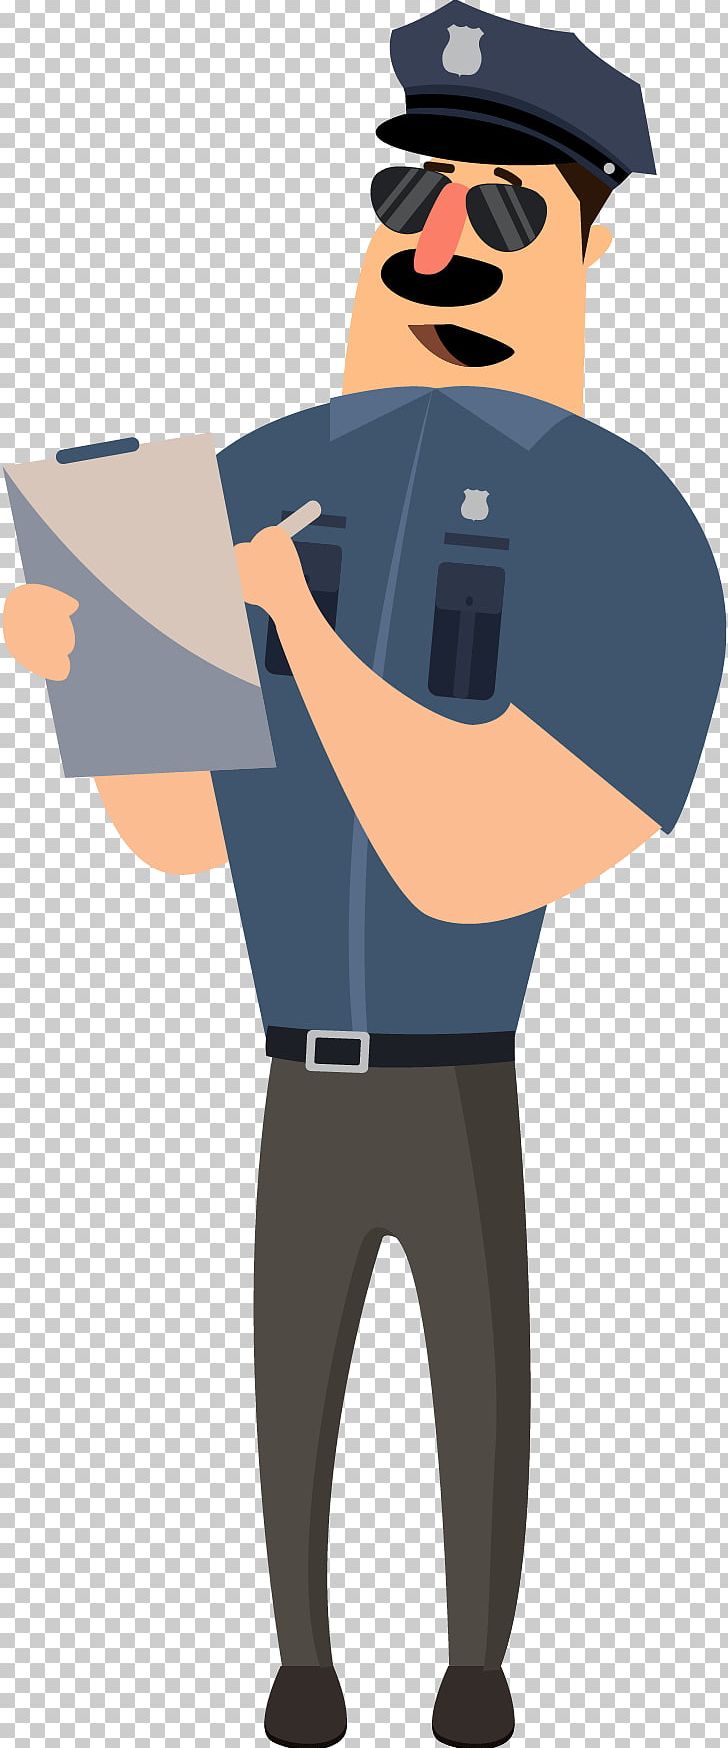 Police Officer Cartoon PNG, Clipart, Angle, Arm, Clip Art, Cop, Encapsulated Postscript Free PNG Download